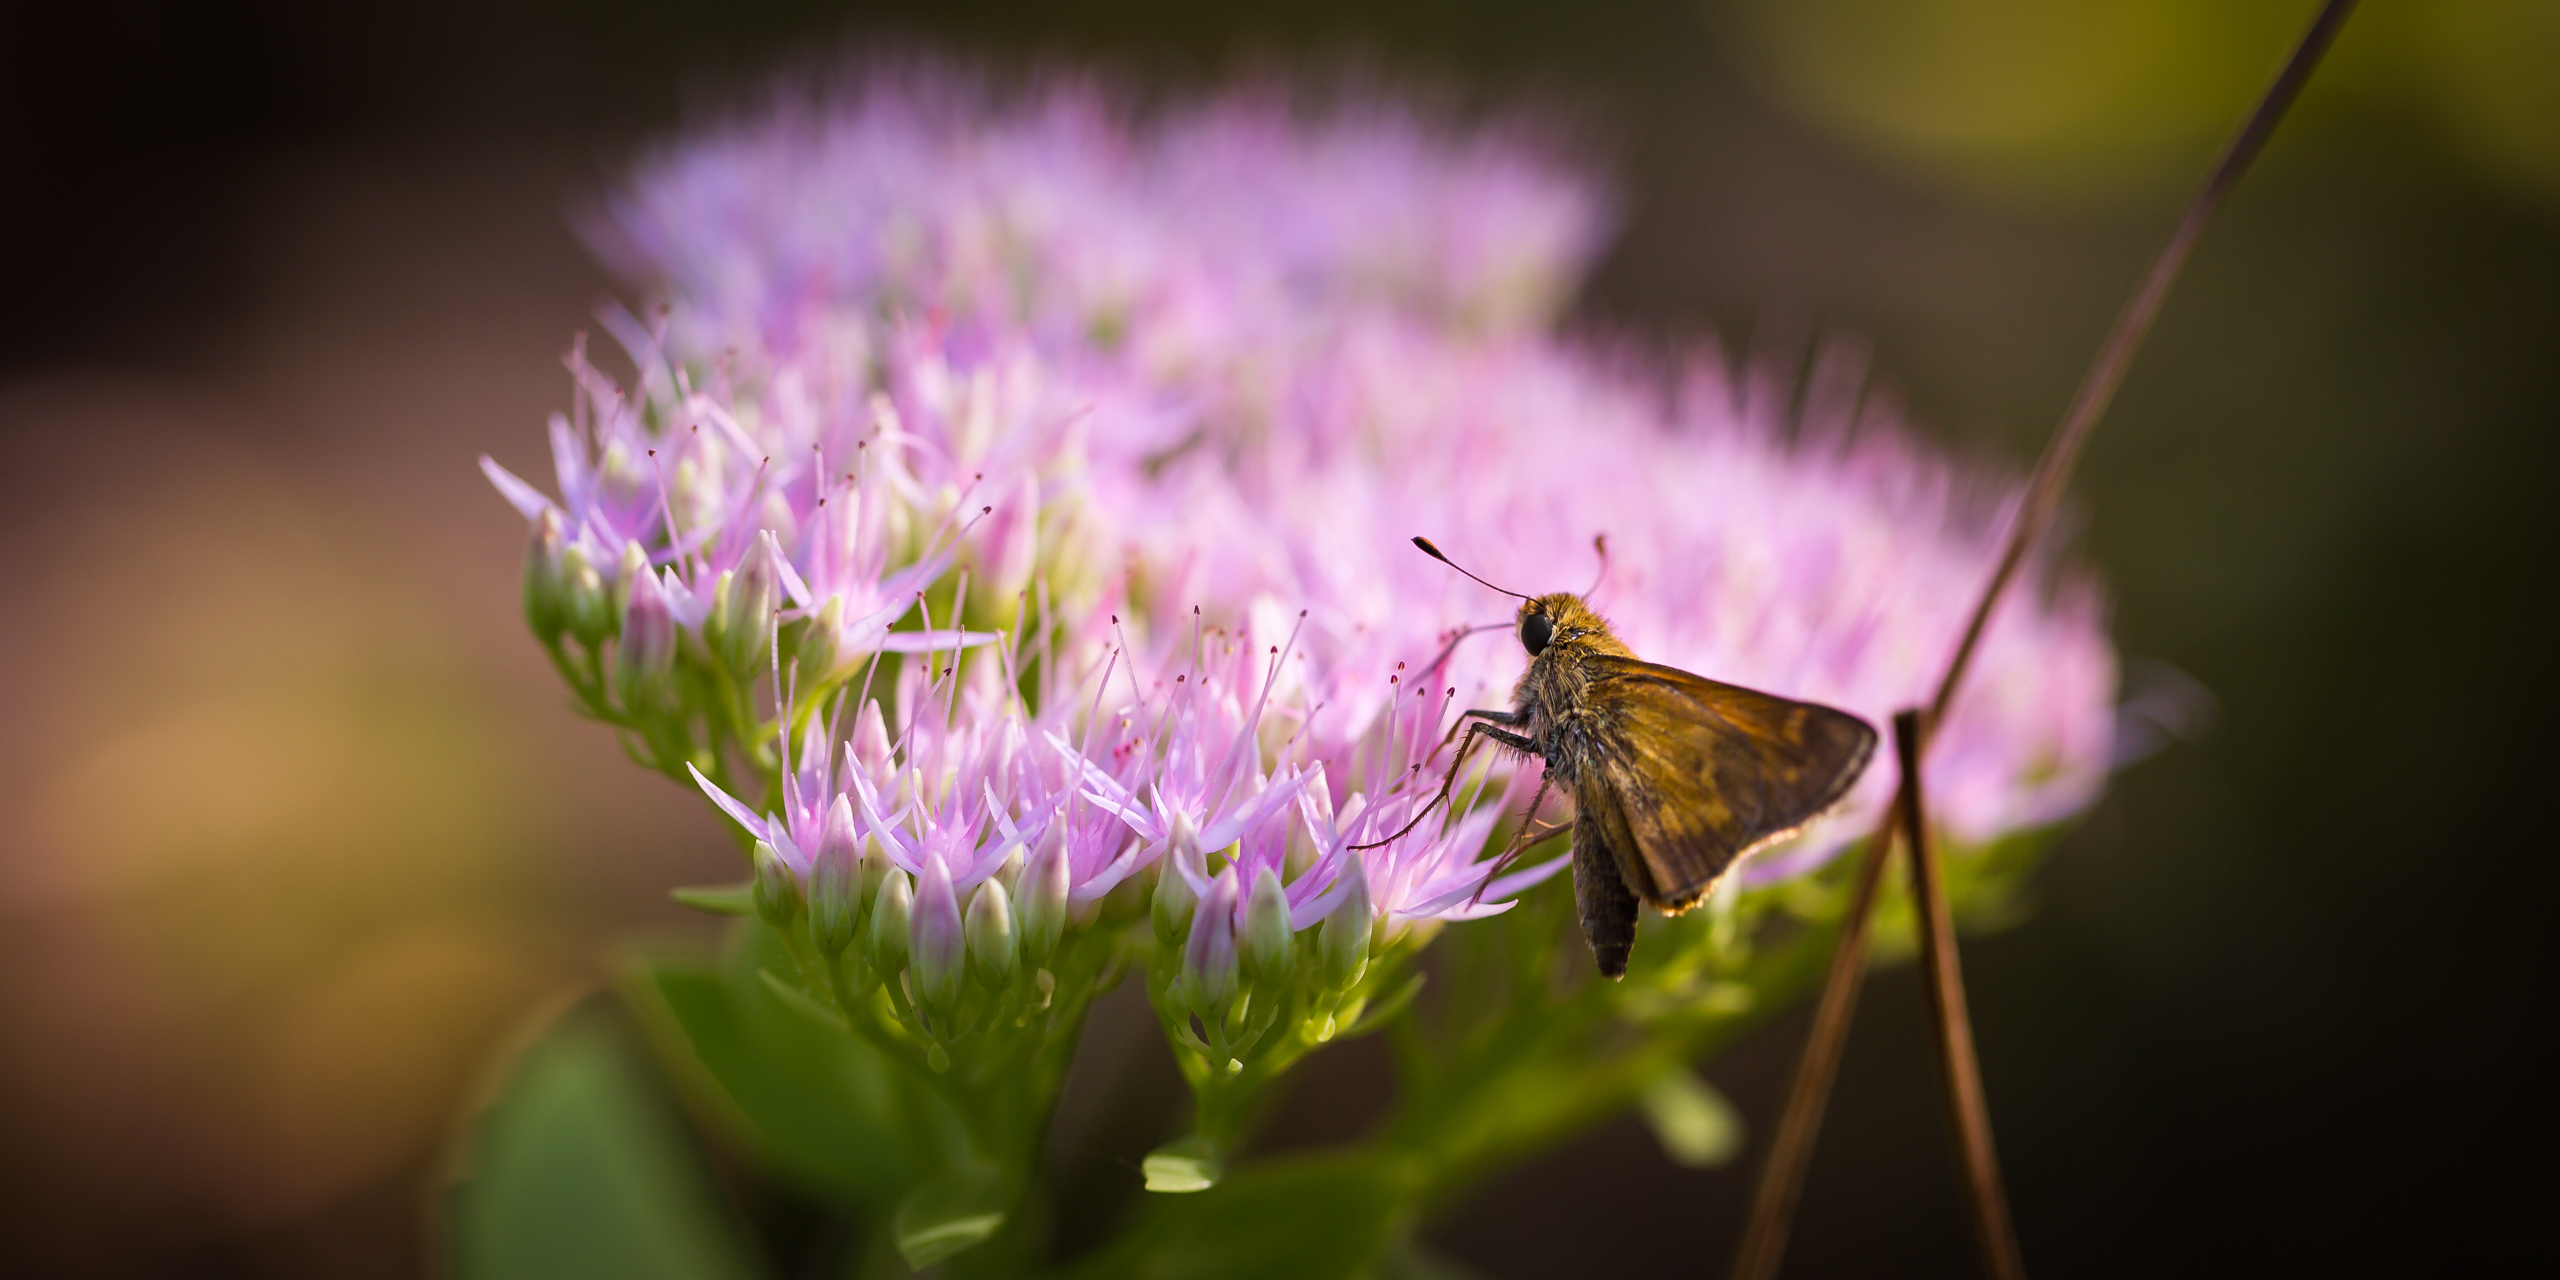 Macro photograph of silver-spotted skipper butterfly feeding on sedum.